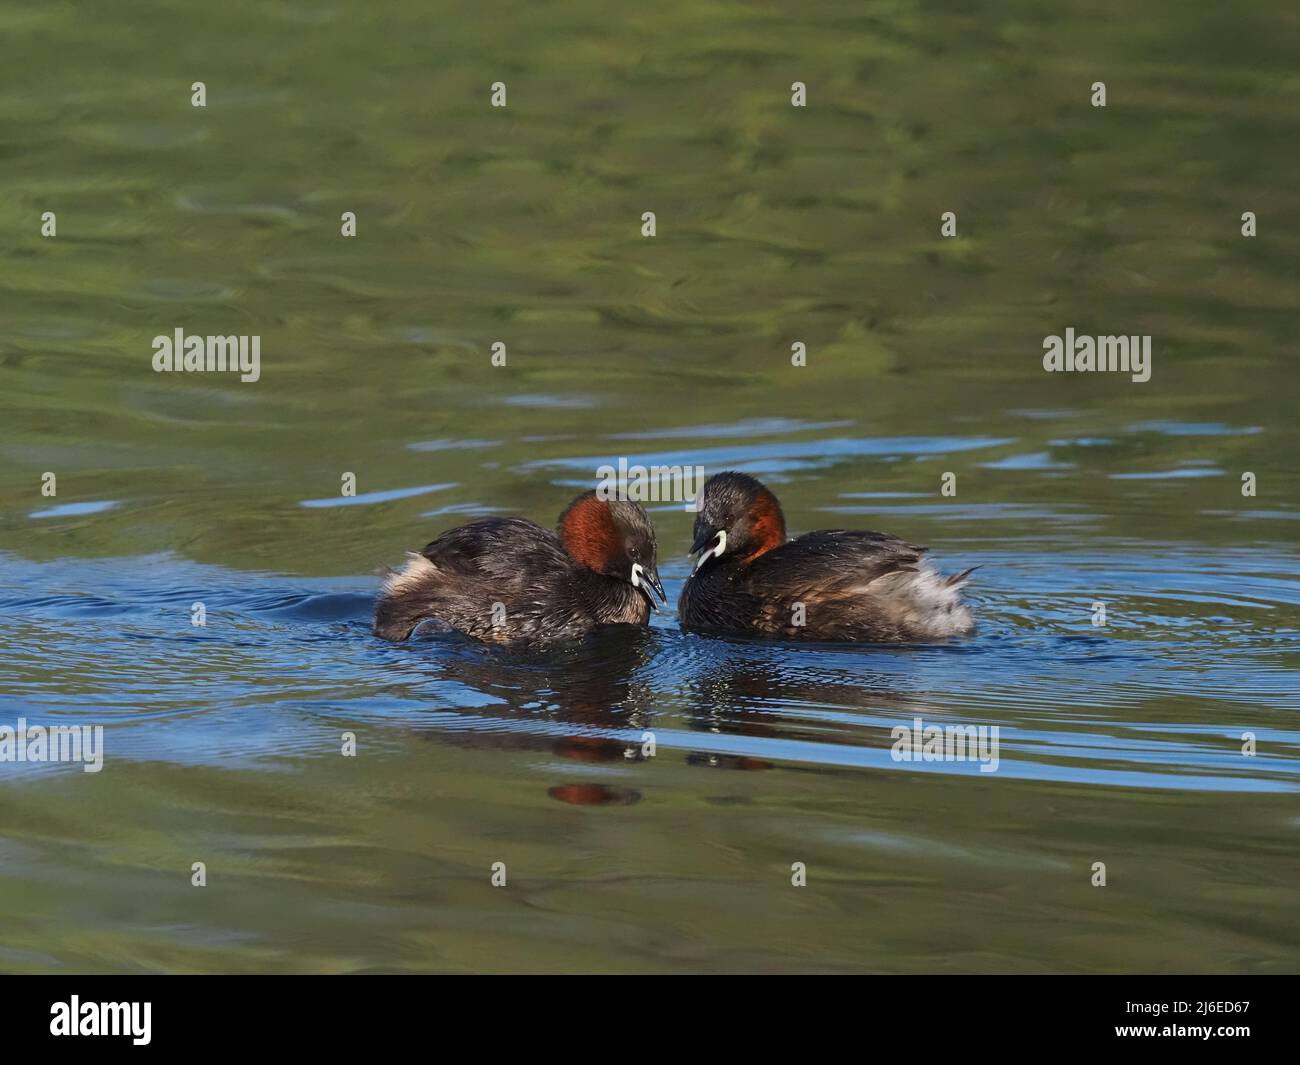 Pre breeding season pairs of little grebe briefly meet each other, frequently calling bonding and establishing territories. Stock Photo